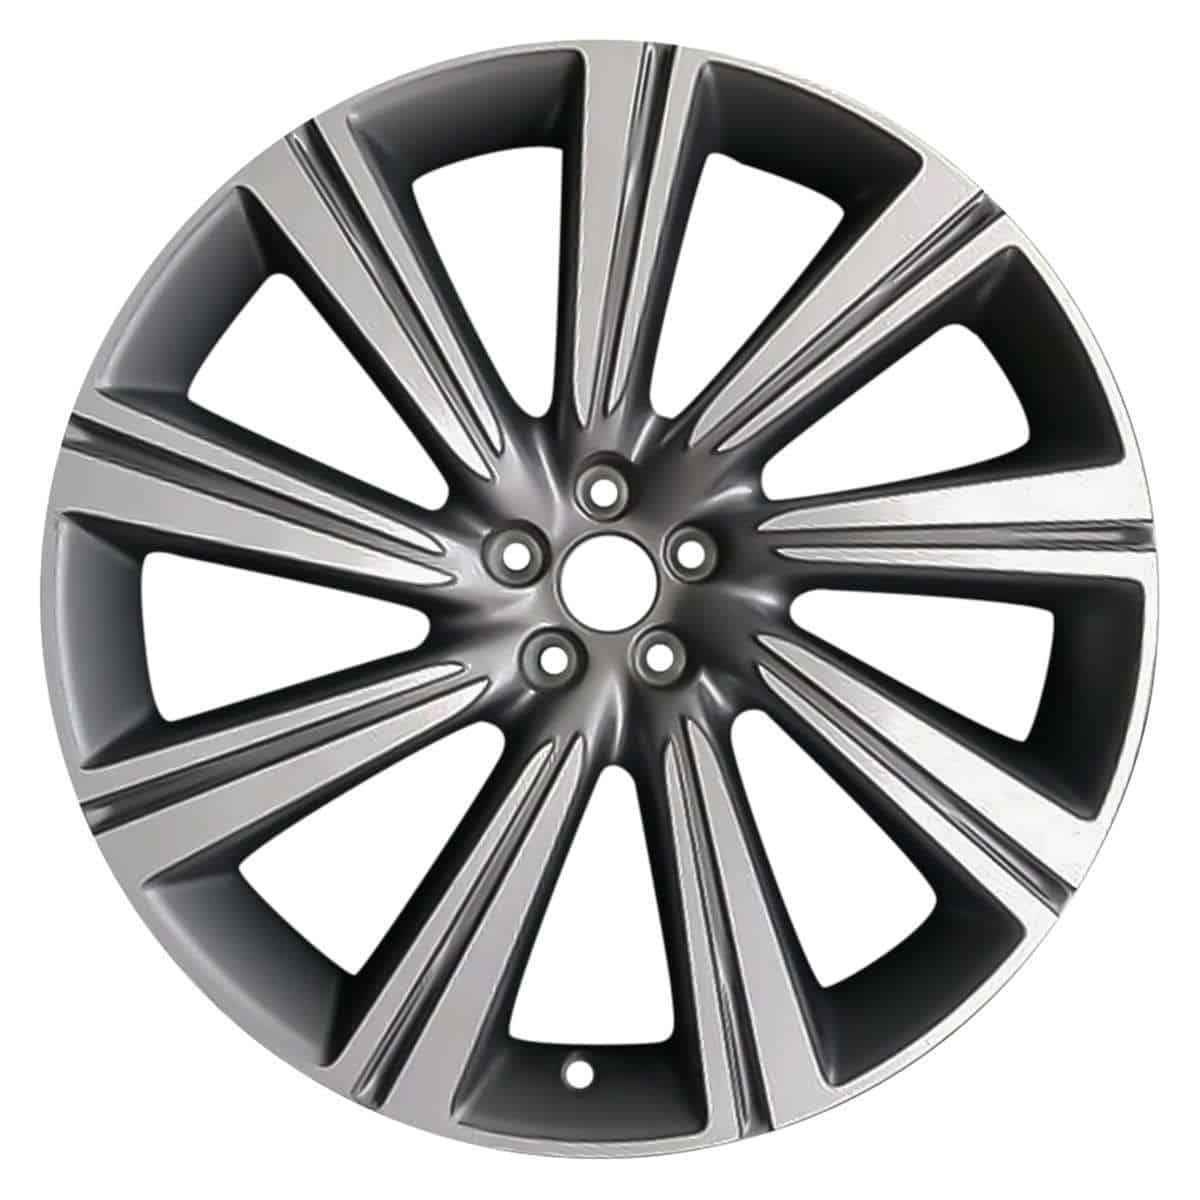 Genuine Jaguar F-Pace 9 Spoke 22″ Inch Alloy Wheels with Grey & Diamond Turned Finish T4A3798